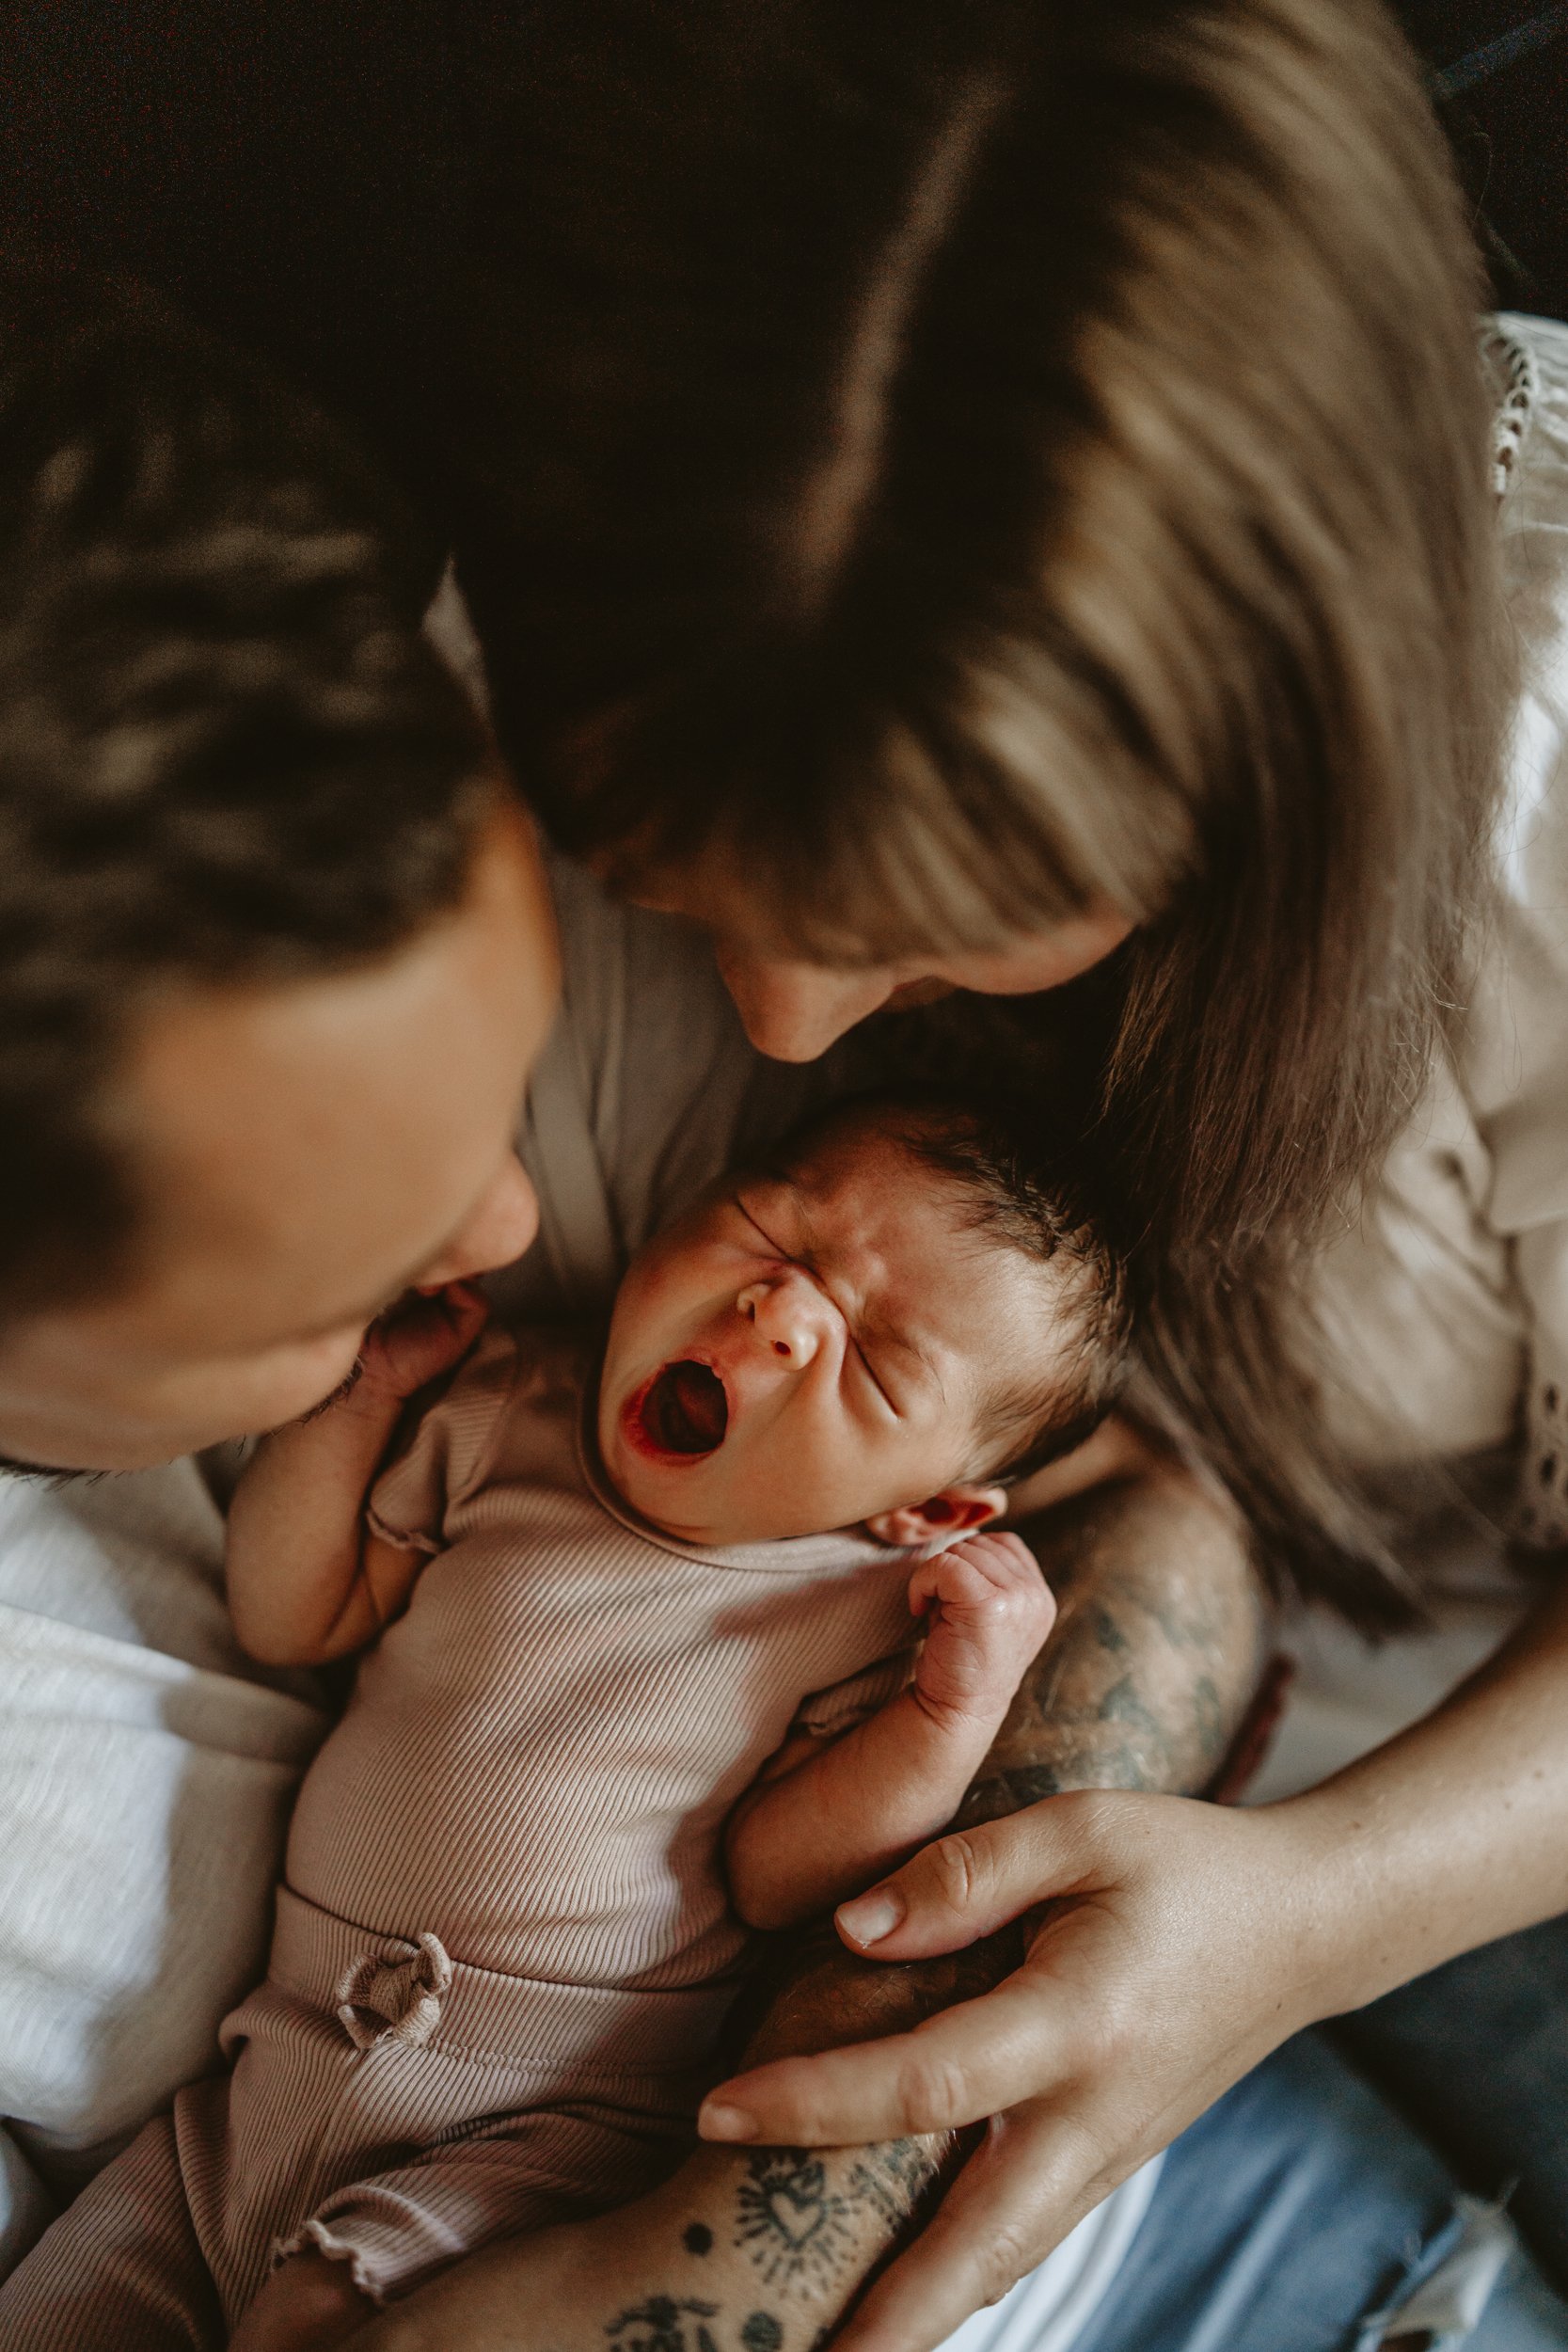  in-home-newborn-photography-in-ramstein-and-kaiserslautern-germany-by-lifestyle-photographer-sarah-havens 